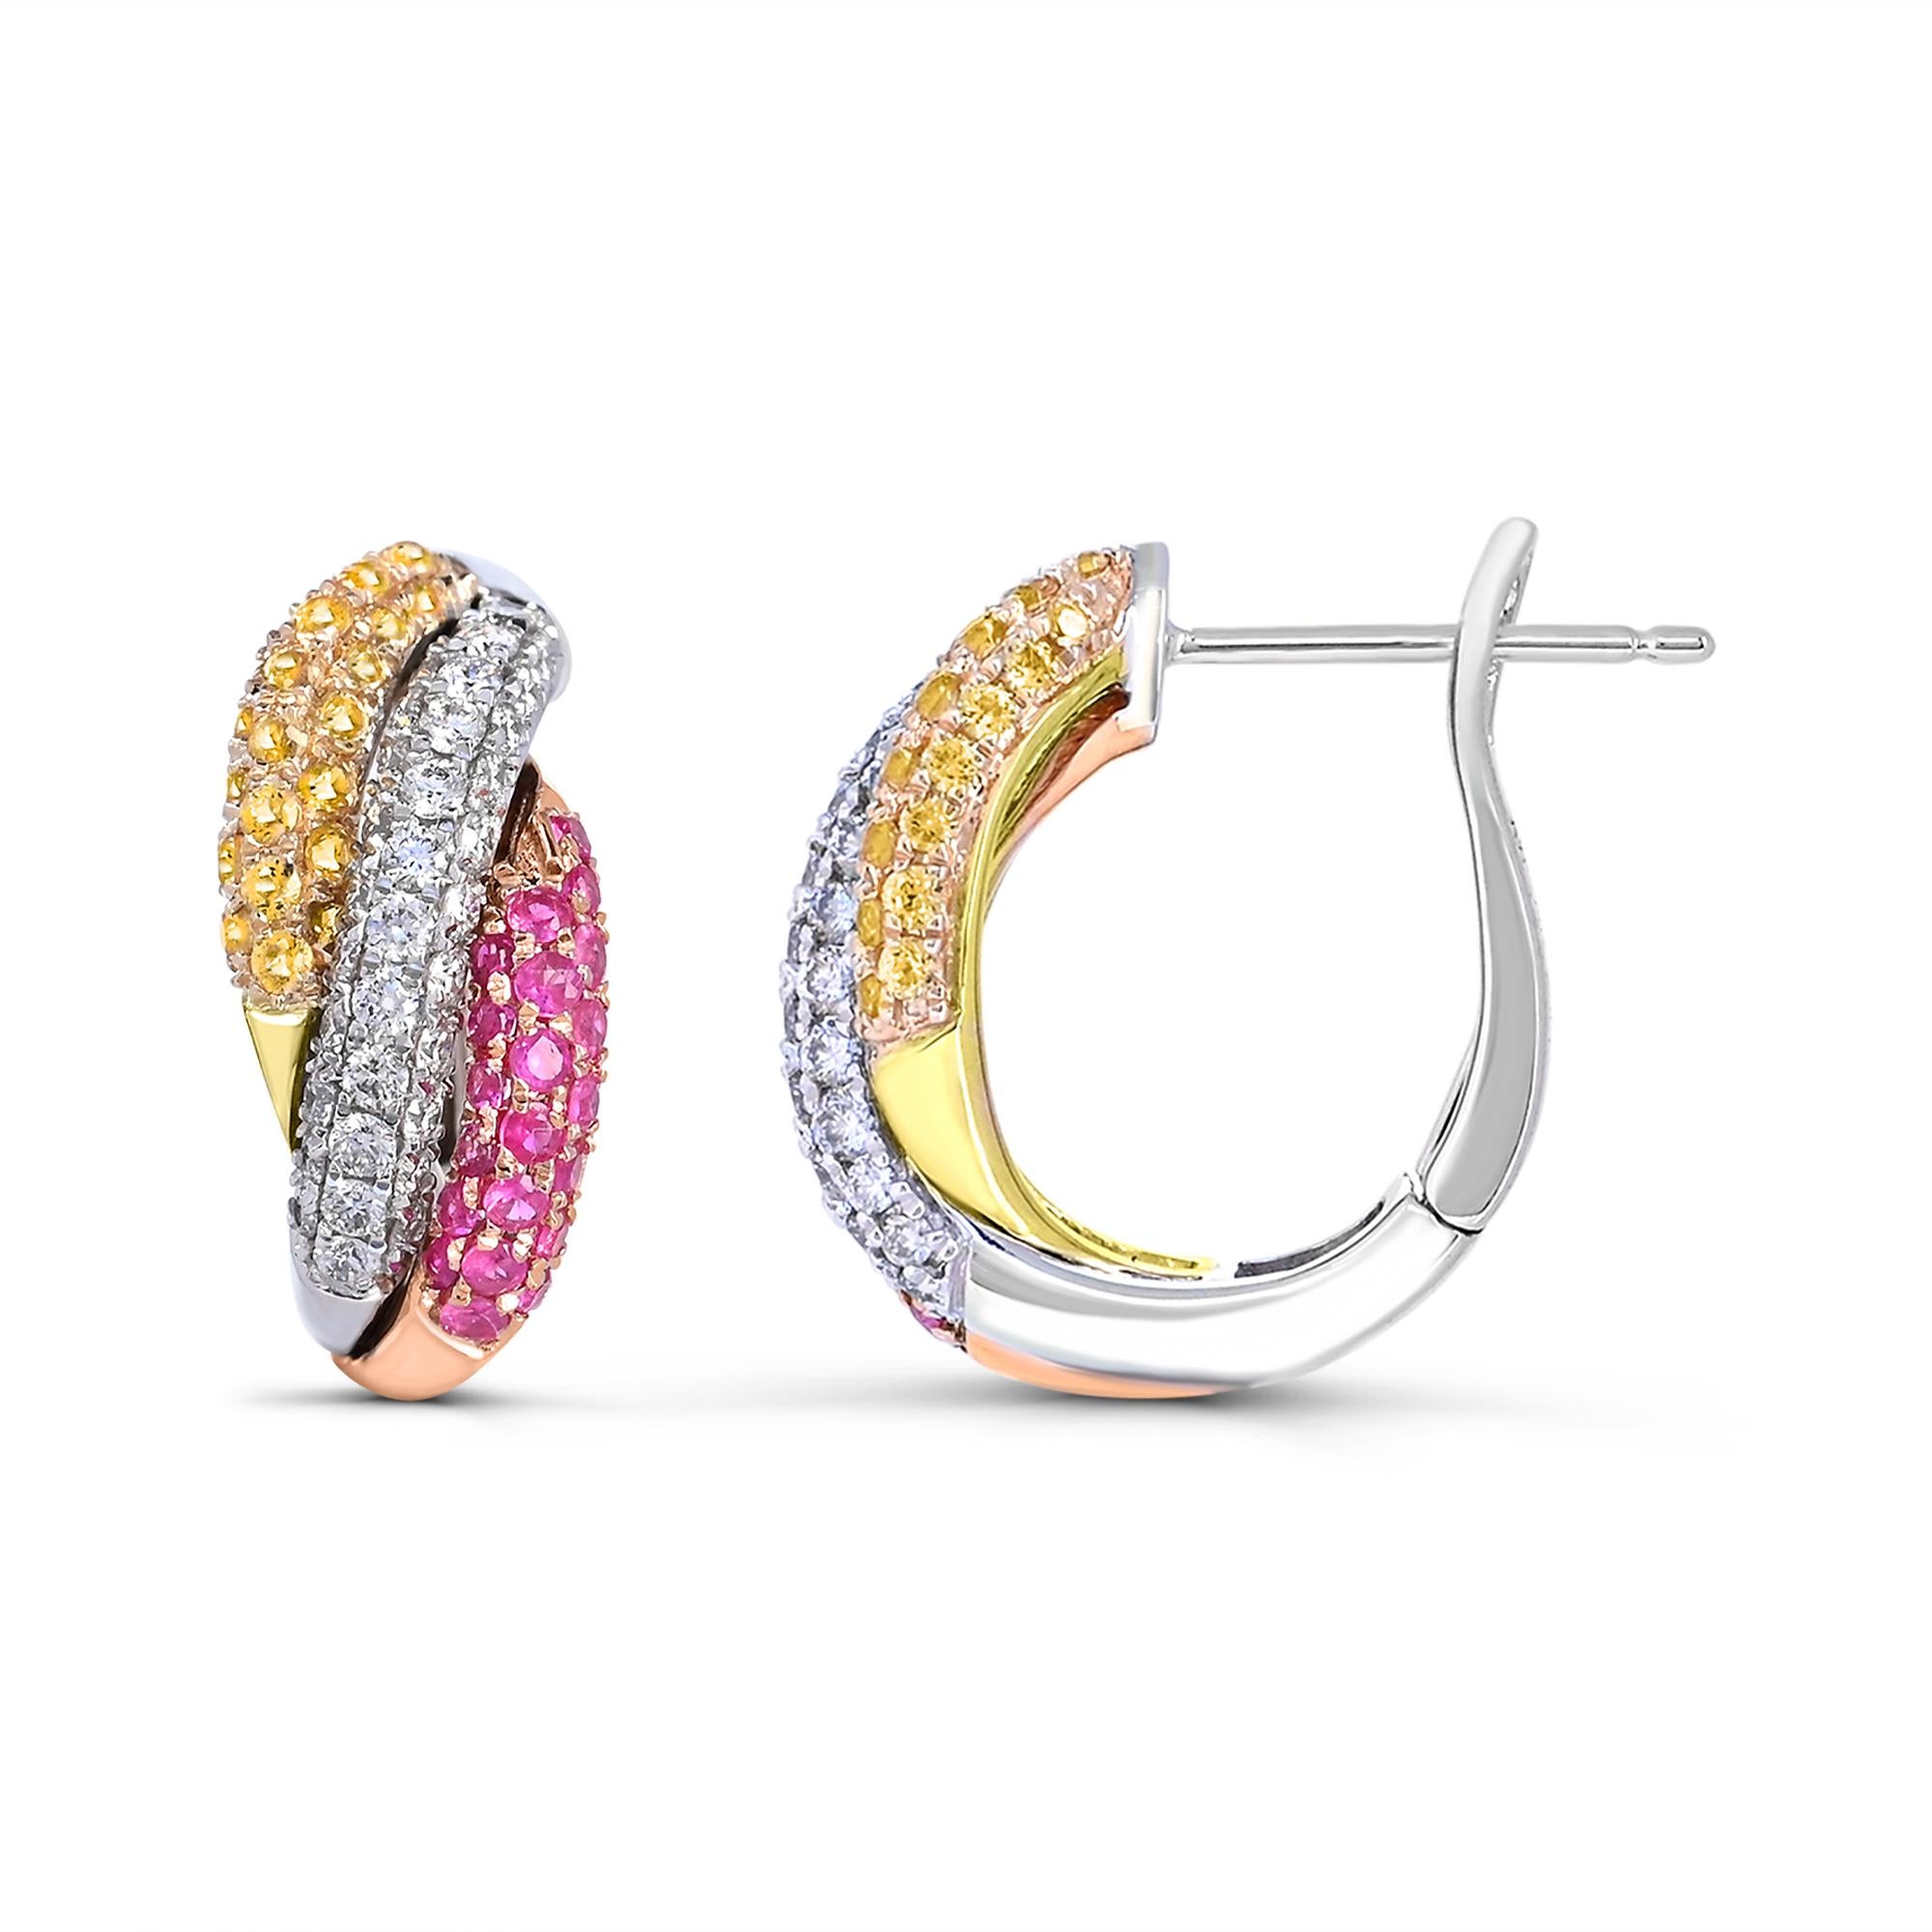 Crafted with exquisite attention to detail, these earrings feature the perfect combination of 14K yellow, pink, and white gold. The AA quality round full cut white diamonds add breathtaking sparkles, while the yellow and pink round sapphires bring